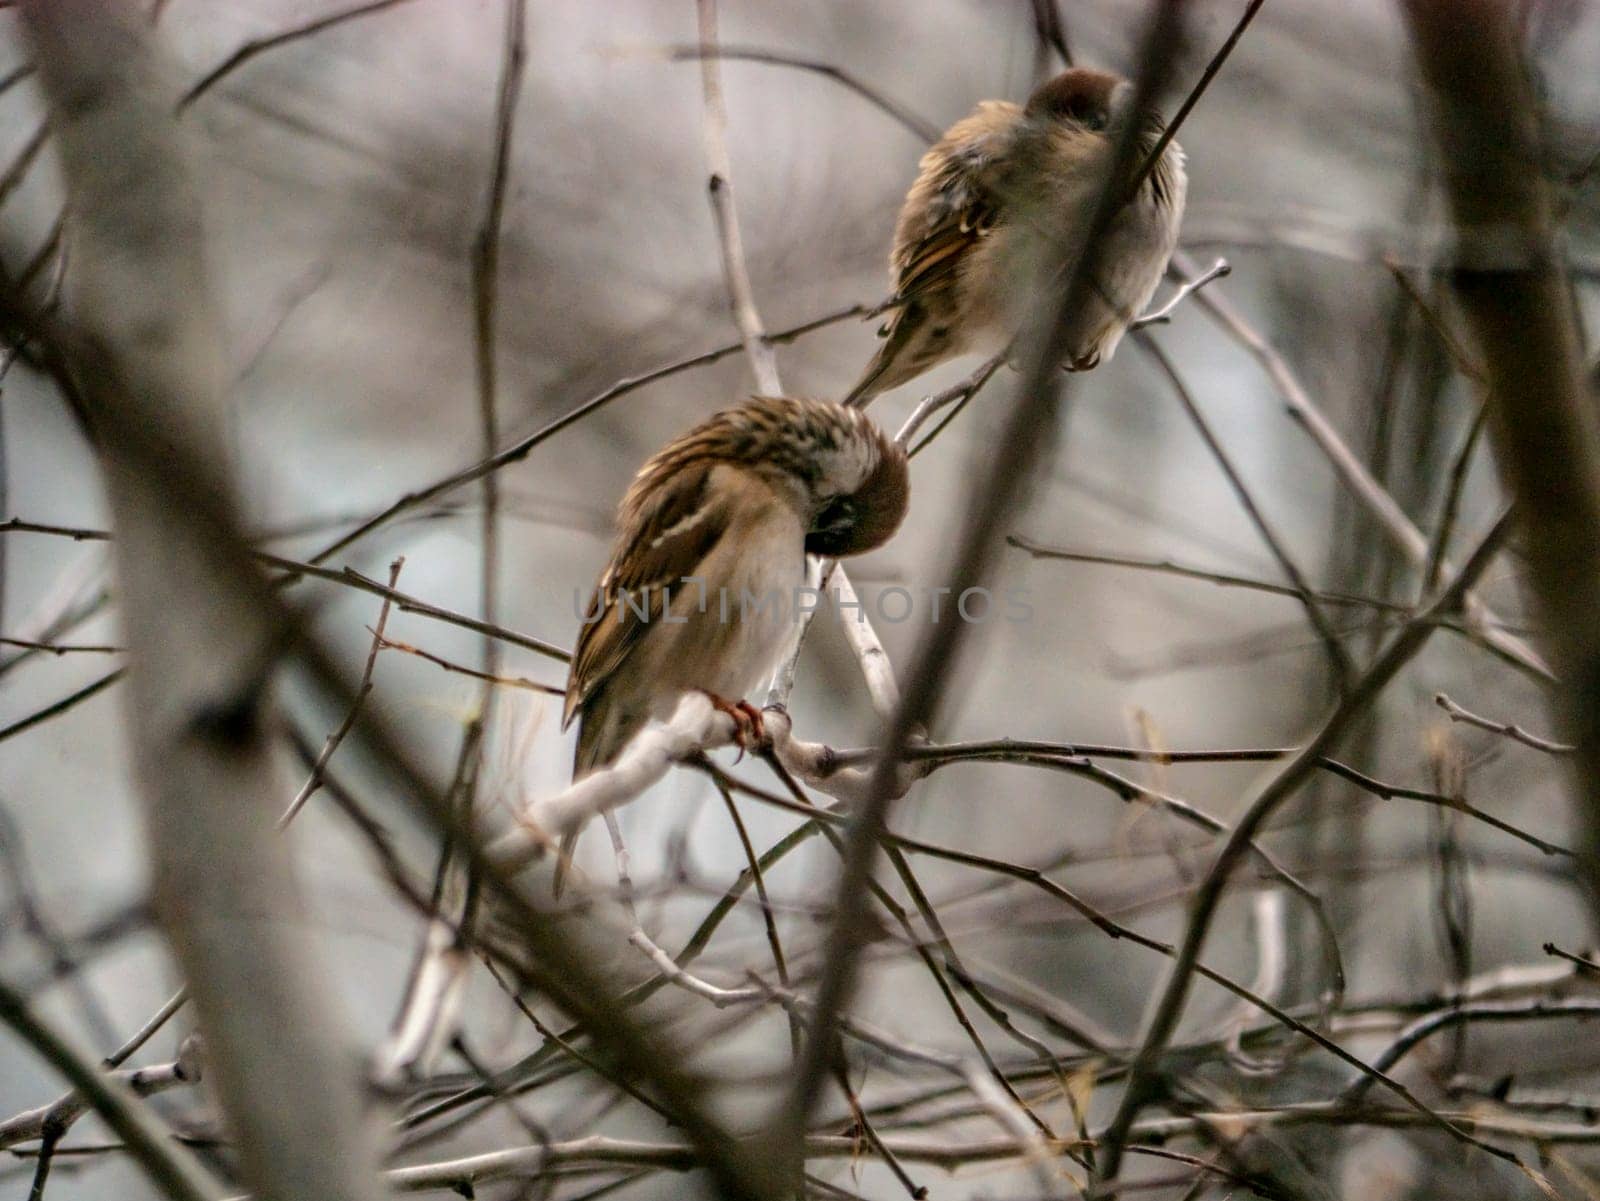 Small sparrow sits on the drying tree branch without leaves during fall season and looking for some food. Fall and first snow with animals. Bird living in city park. Urban birds.